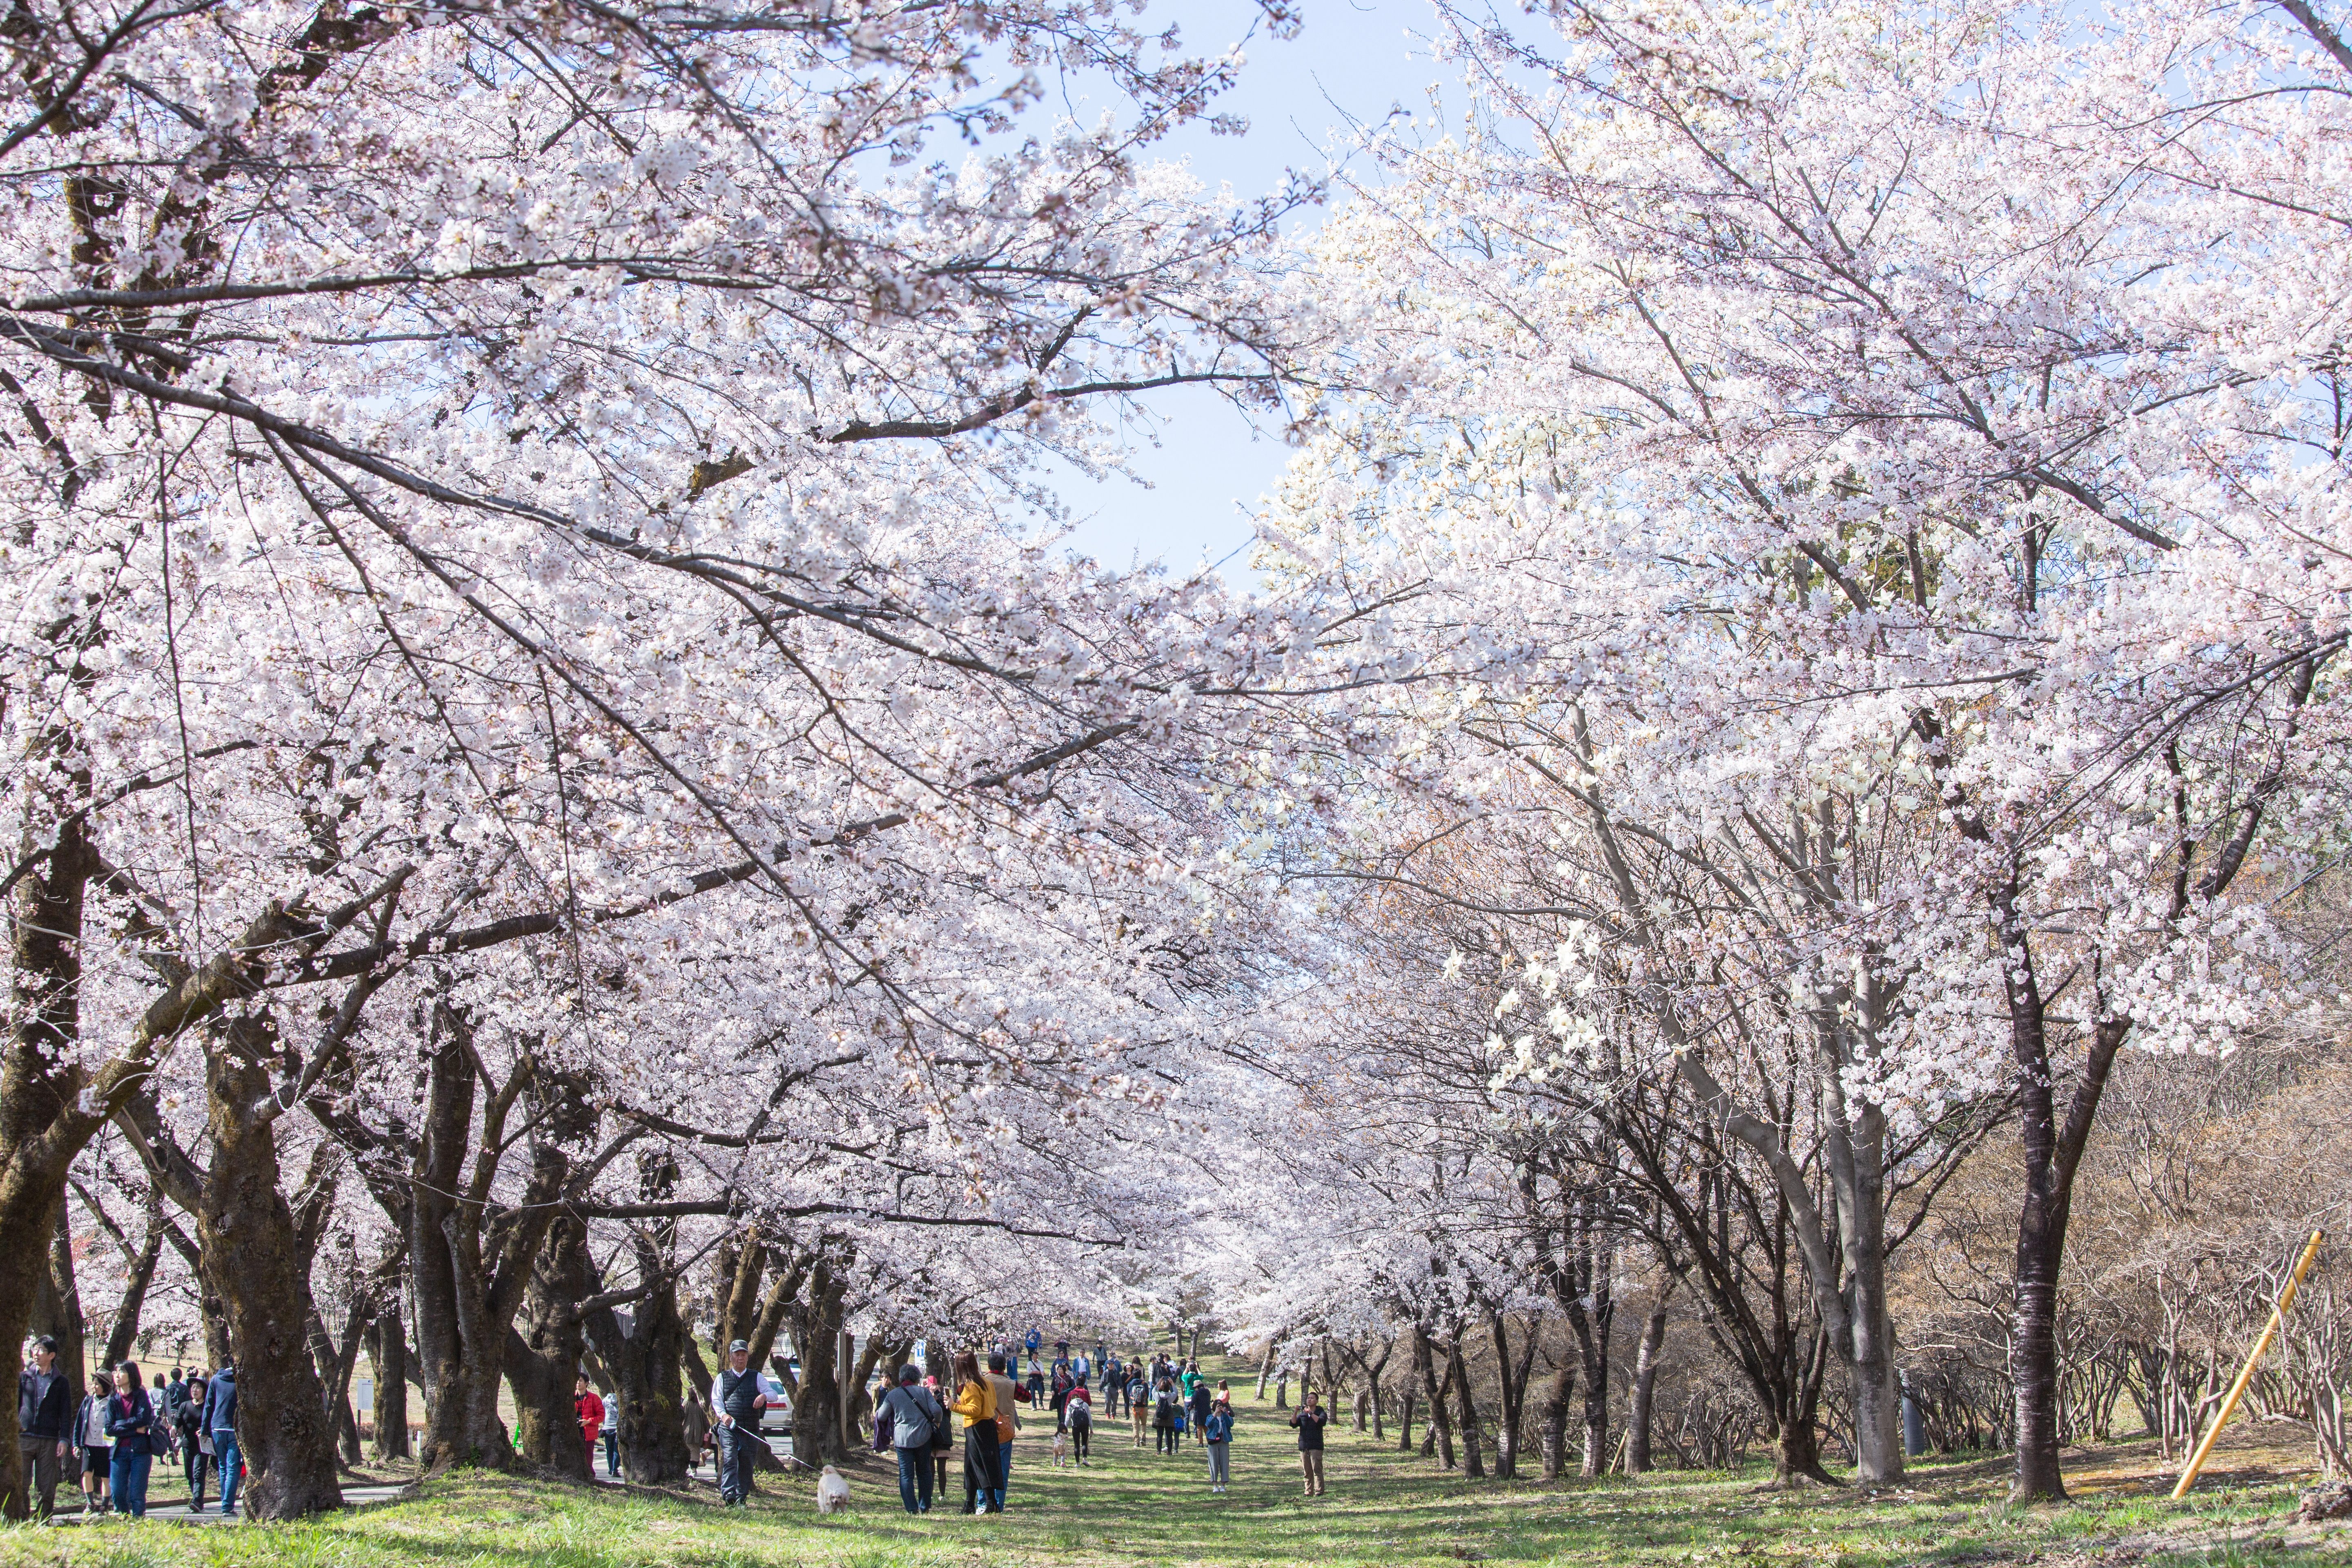 A field lined with cherry blossoms